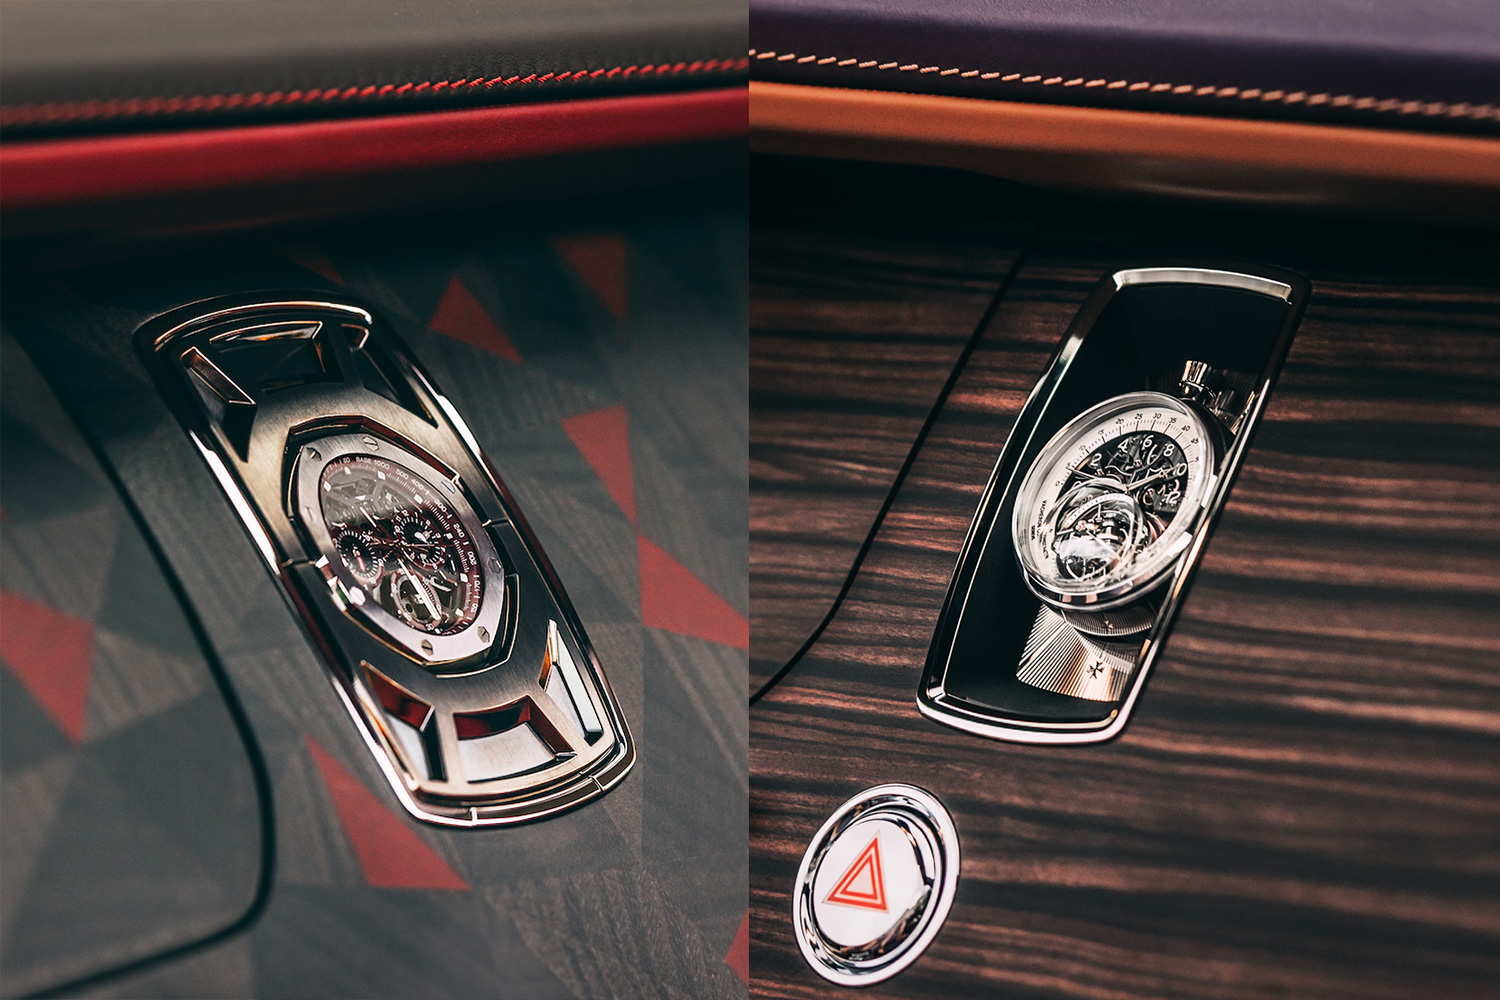 The Audemars Piguet watch in the Rolls-Royce La Rose Noire (left) and Vacheron Constantin in the Amethyst Droptail (right)